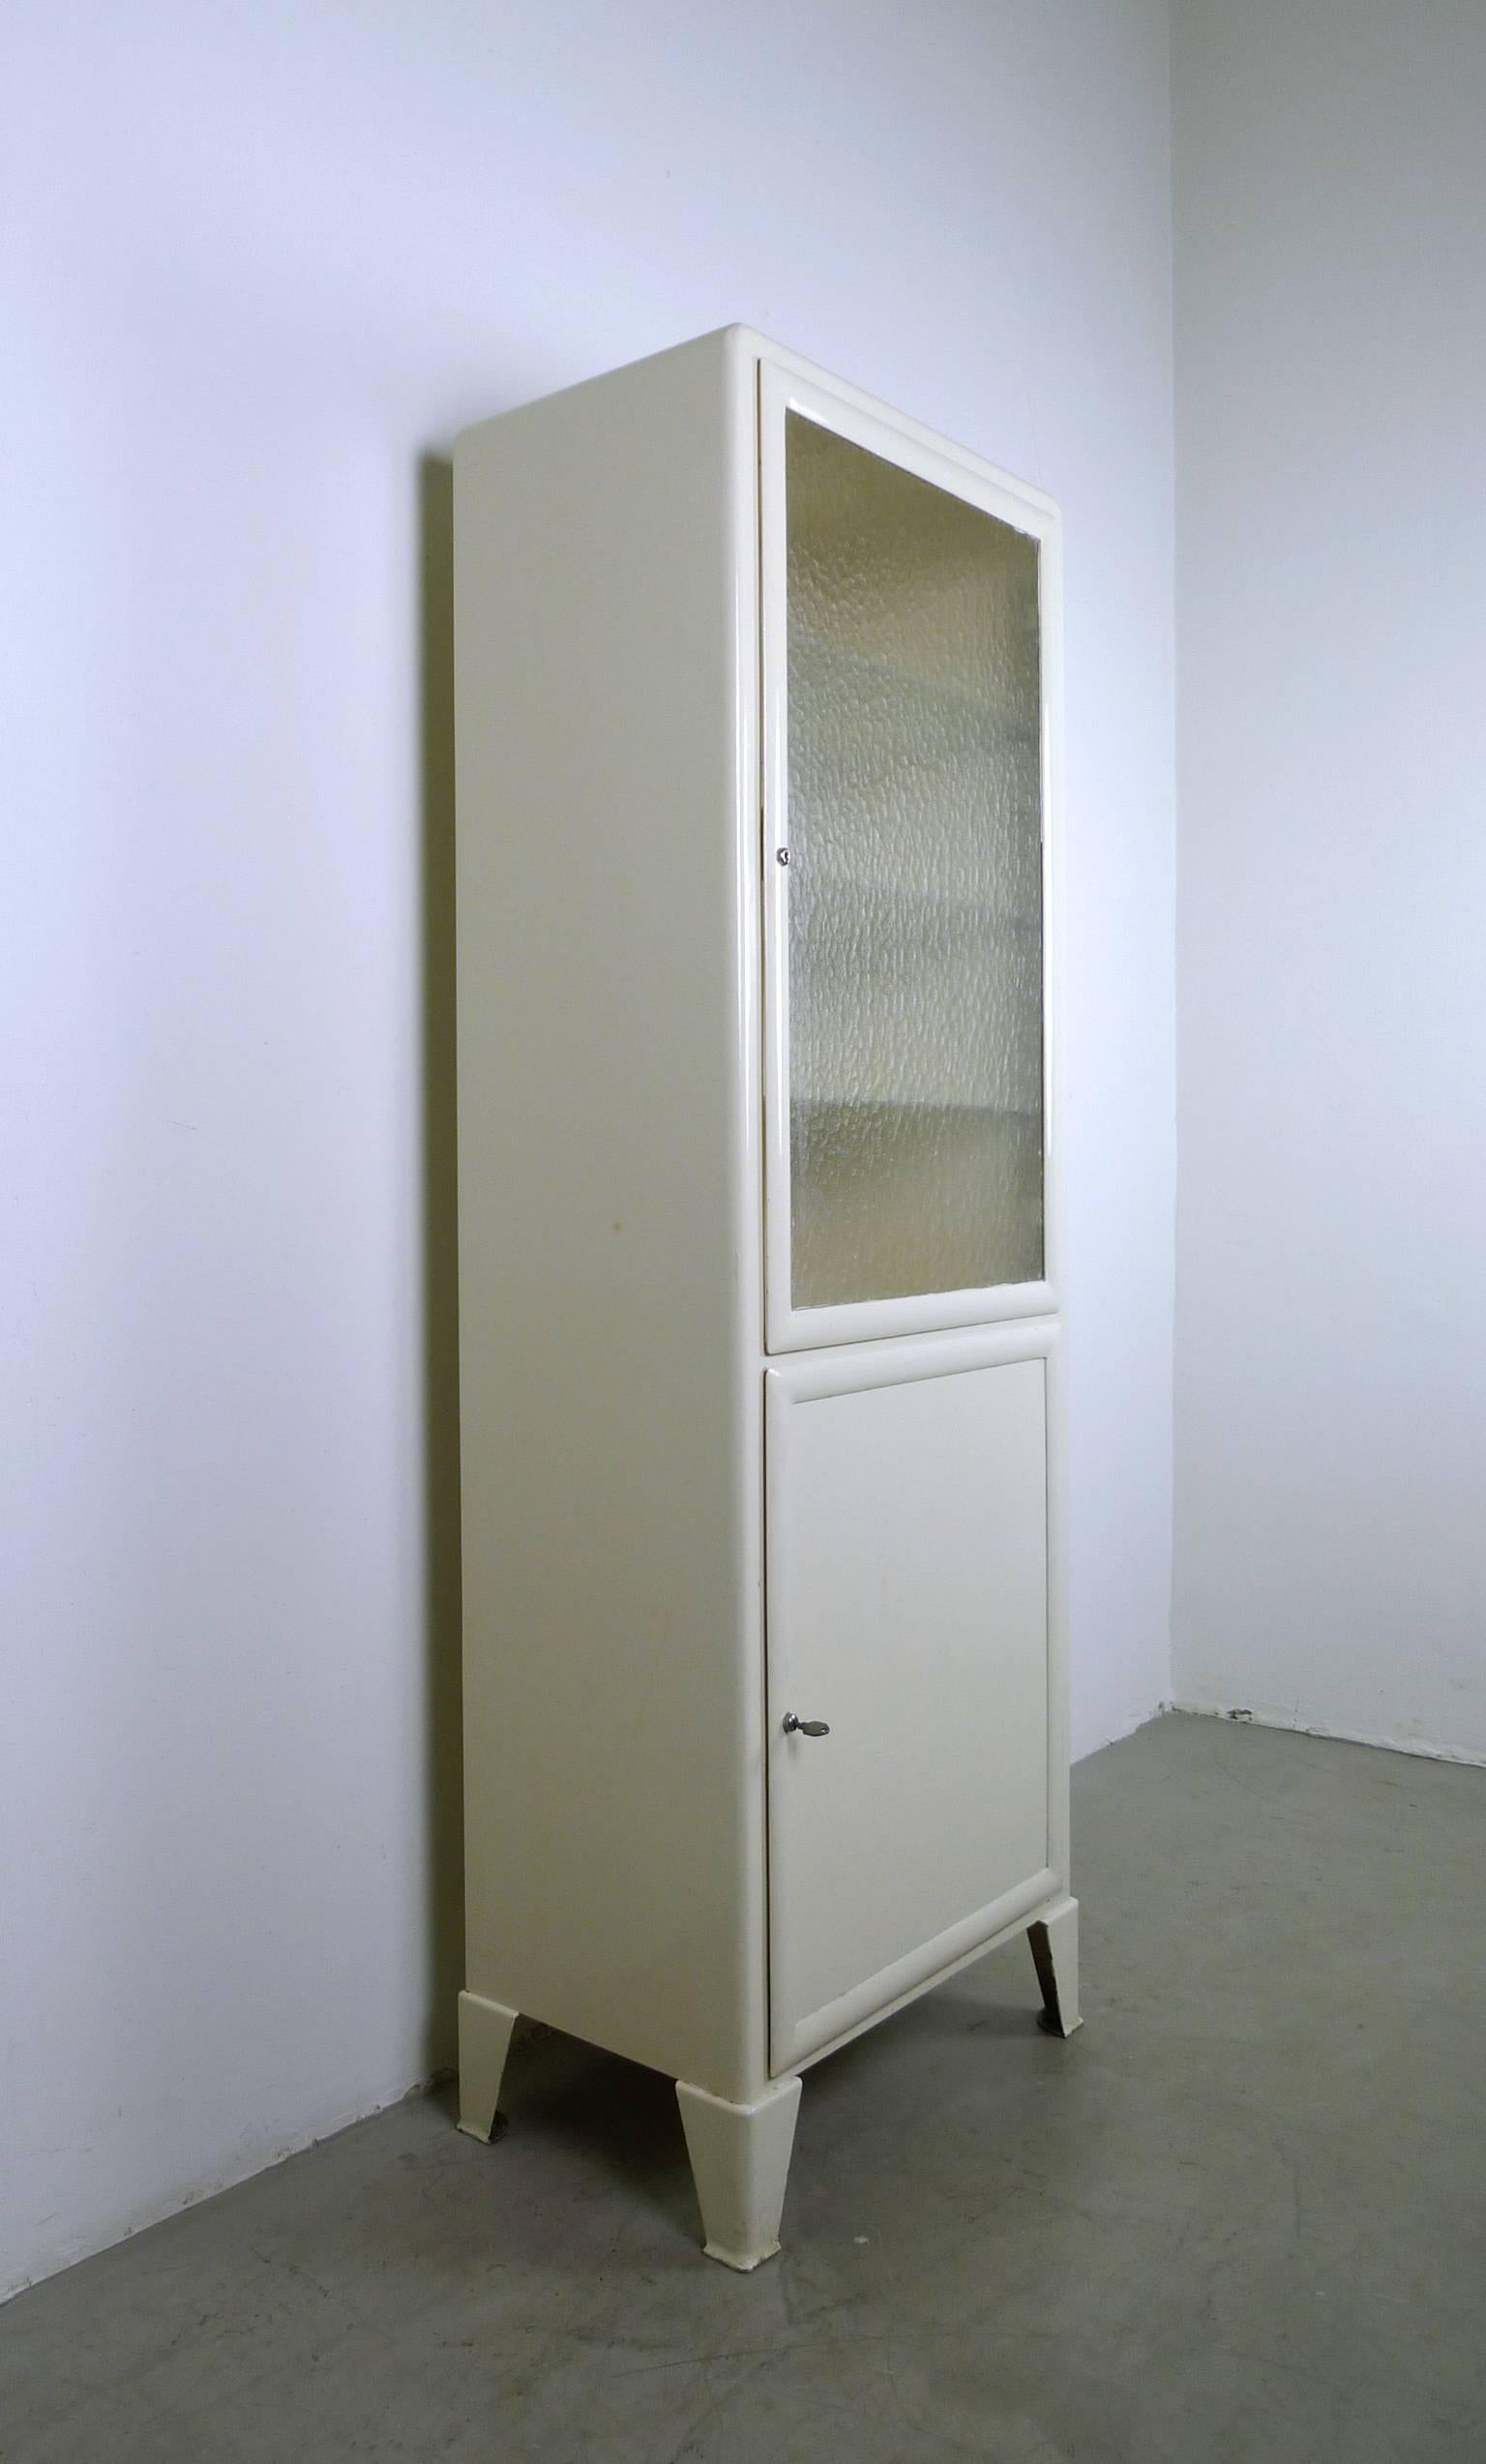 Two-door, ivory-colored steel cabinet with cathedral glass pane embedded in the upper door. Both doors equipped with locks, the original key is present. Behind the upper door are three height-adjustable shelves in corrugated glass. Behind the lower